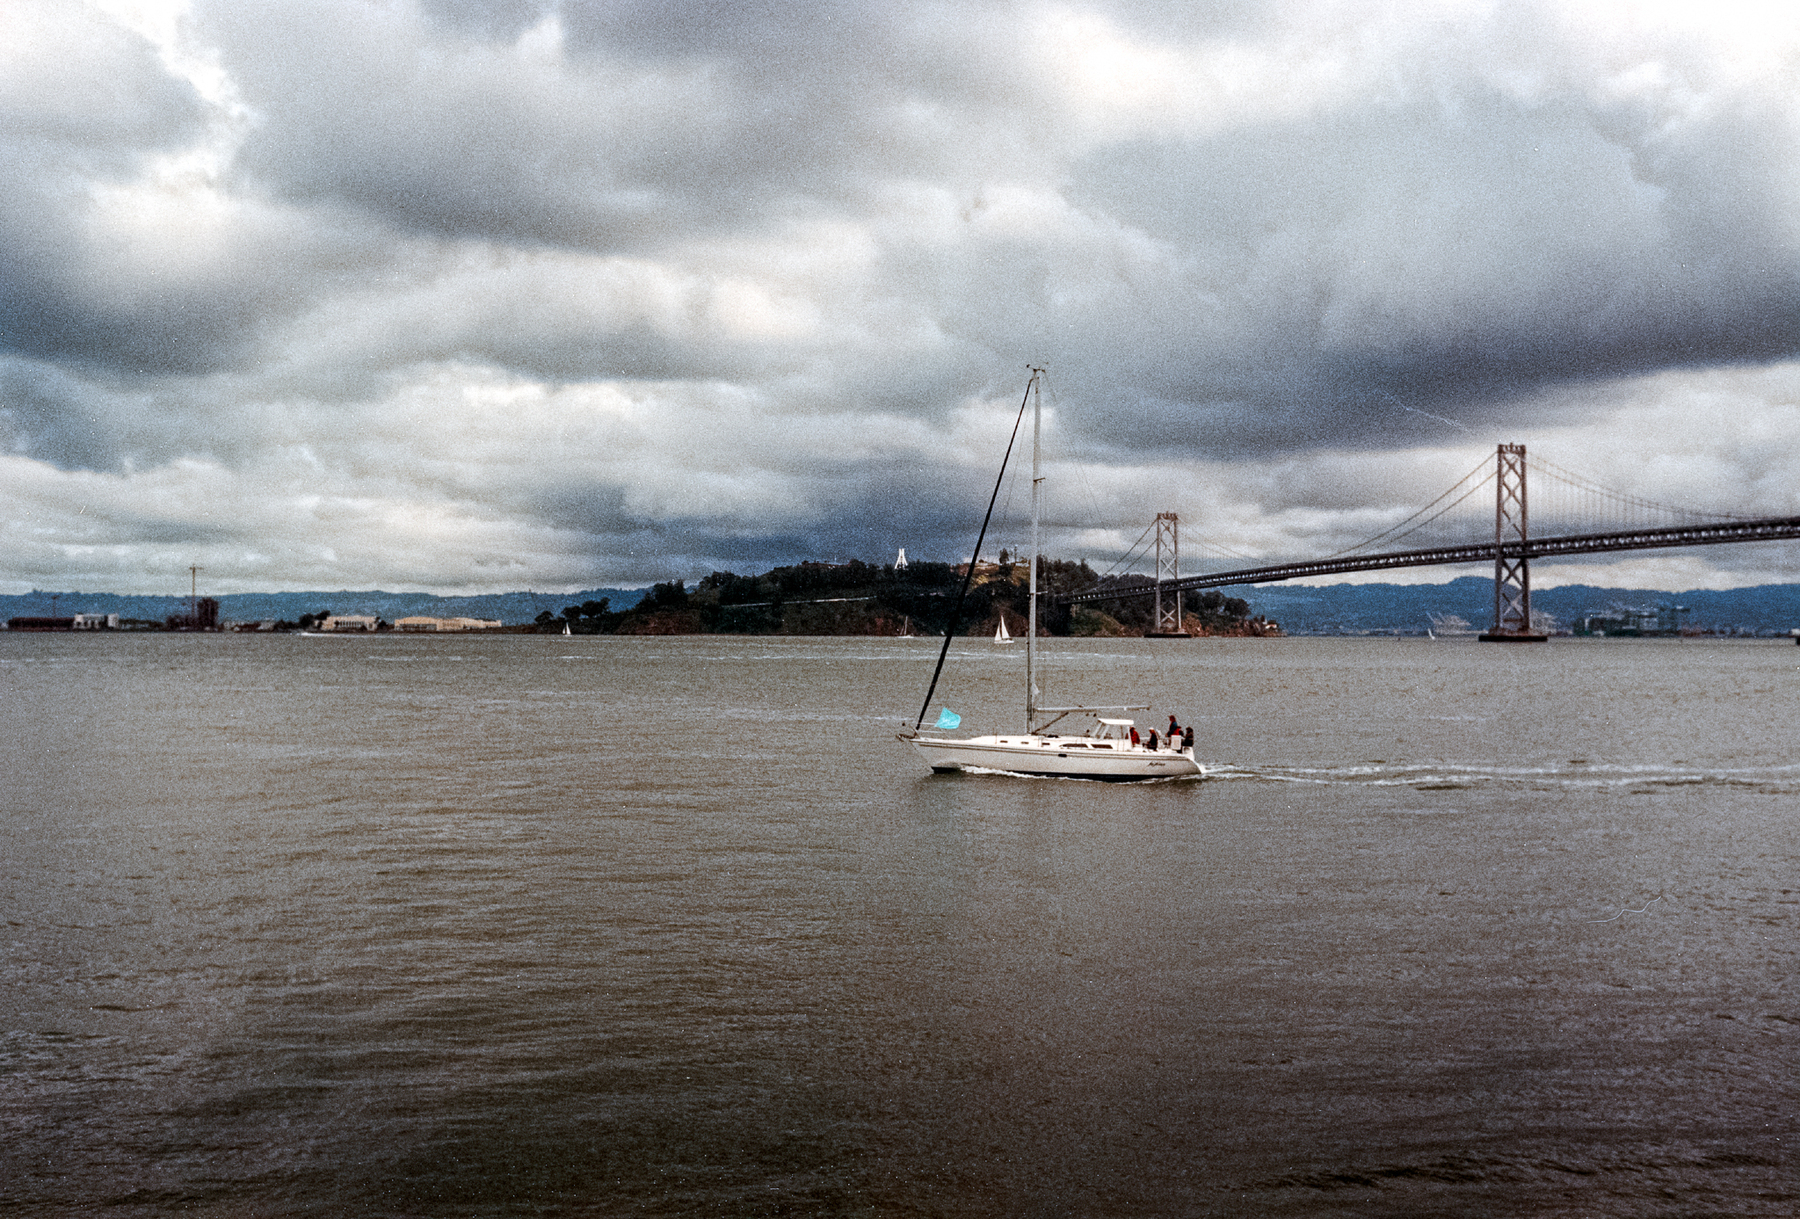 A scan of a color photograph of a group of people boating near the Bay Bridge